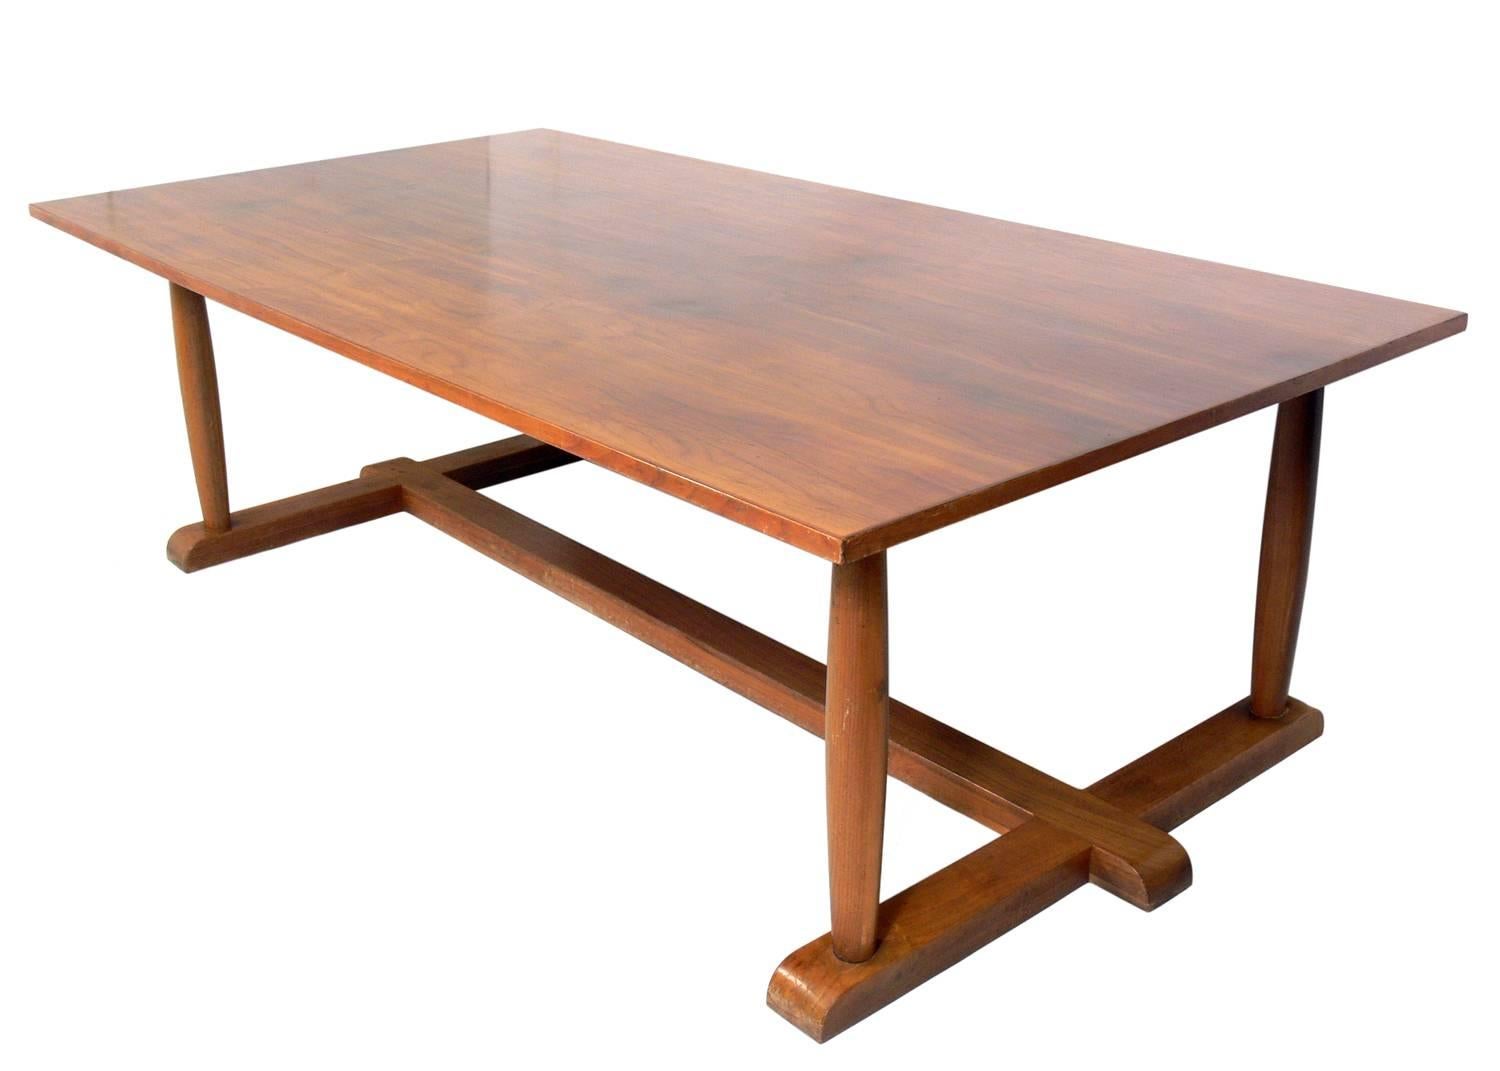 Large-scale neoclassical dining table, probably American, circa 1950s. Measuring an impressive 7.5 feet x 4 feet, it would work well as a dining table, conference table, or library table.